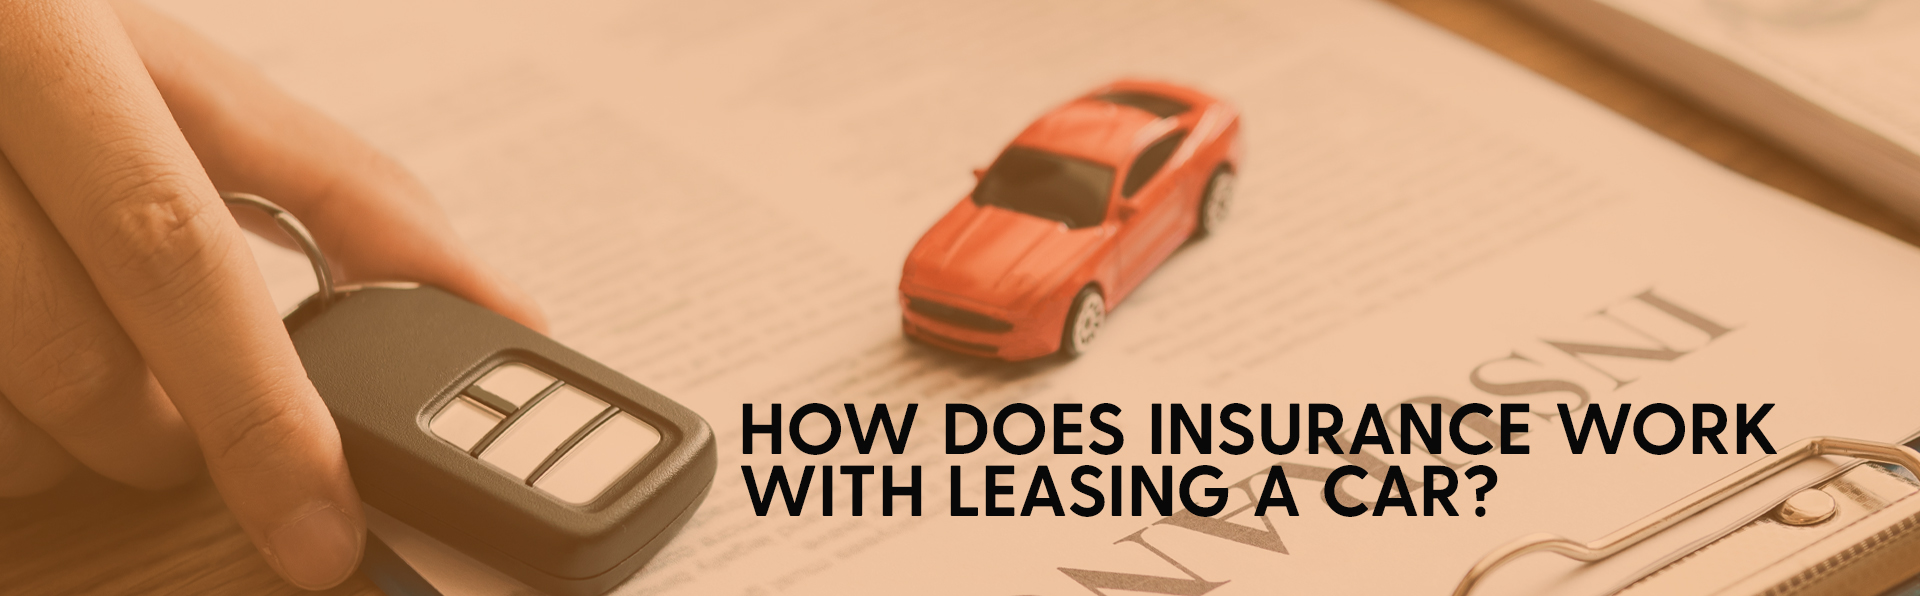 How Does Insurance Work With Leasing a Car?